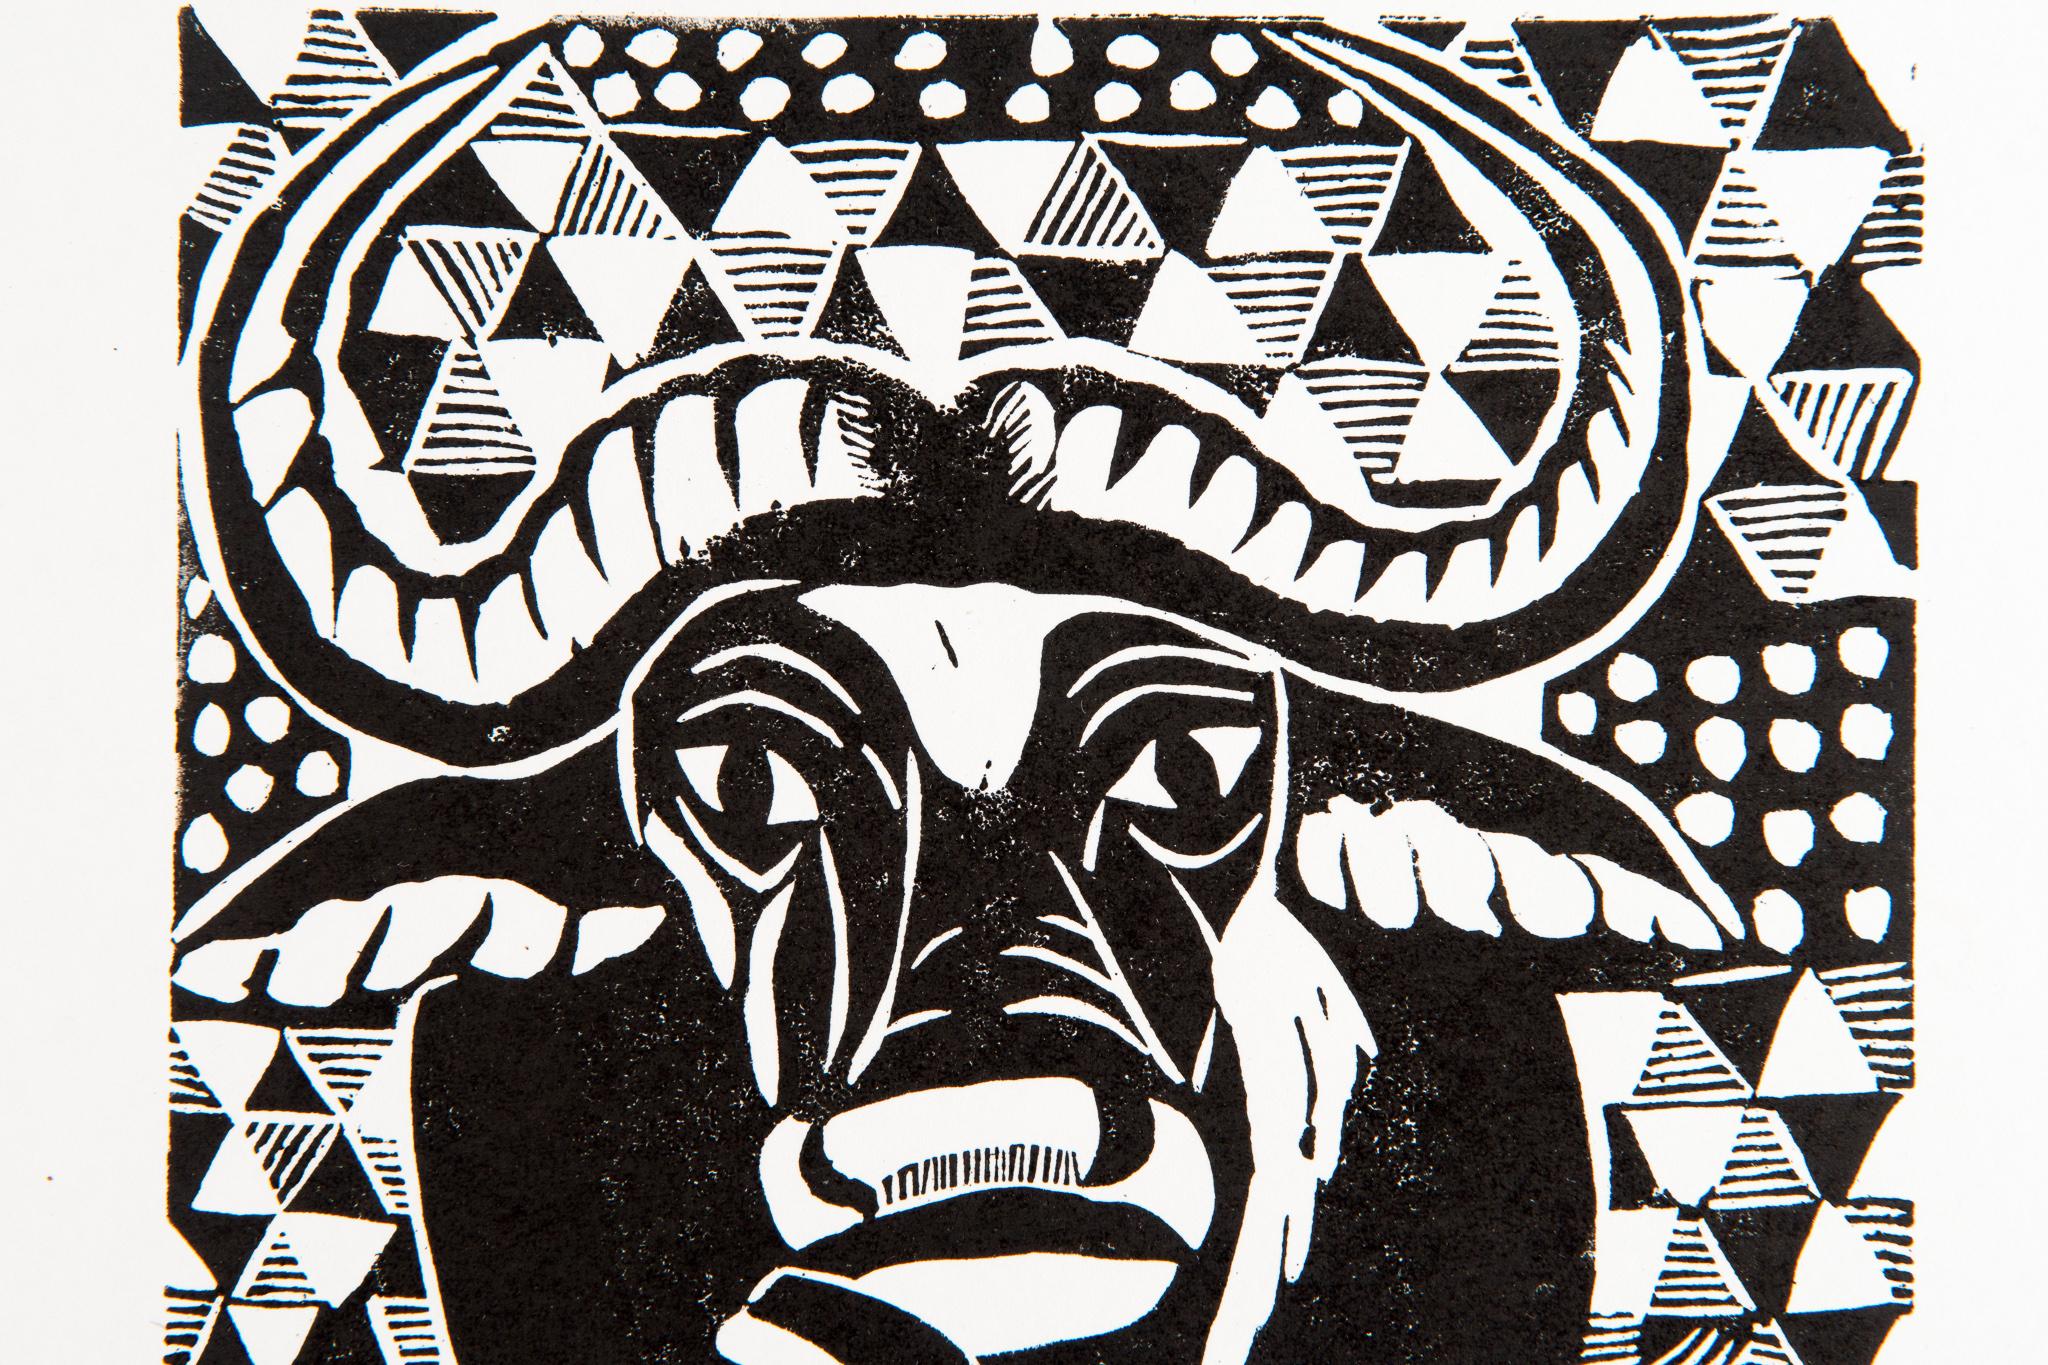 African Big 5, 2009. Linoleum block print on paper. Edition of 8.

Elia Shiwoohamba was born in 1981 in Windhoek, Namibia. He graduated from the John Muafangejo Art Centre in Windhoek in 2006. Specialising in printmaking and sculpture, Shiwoohamba